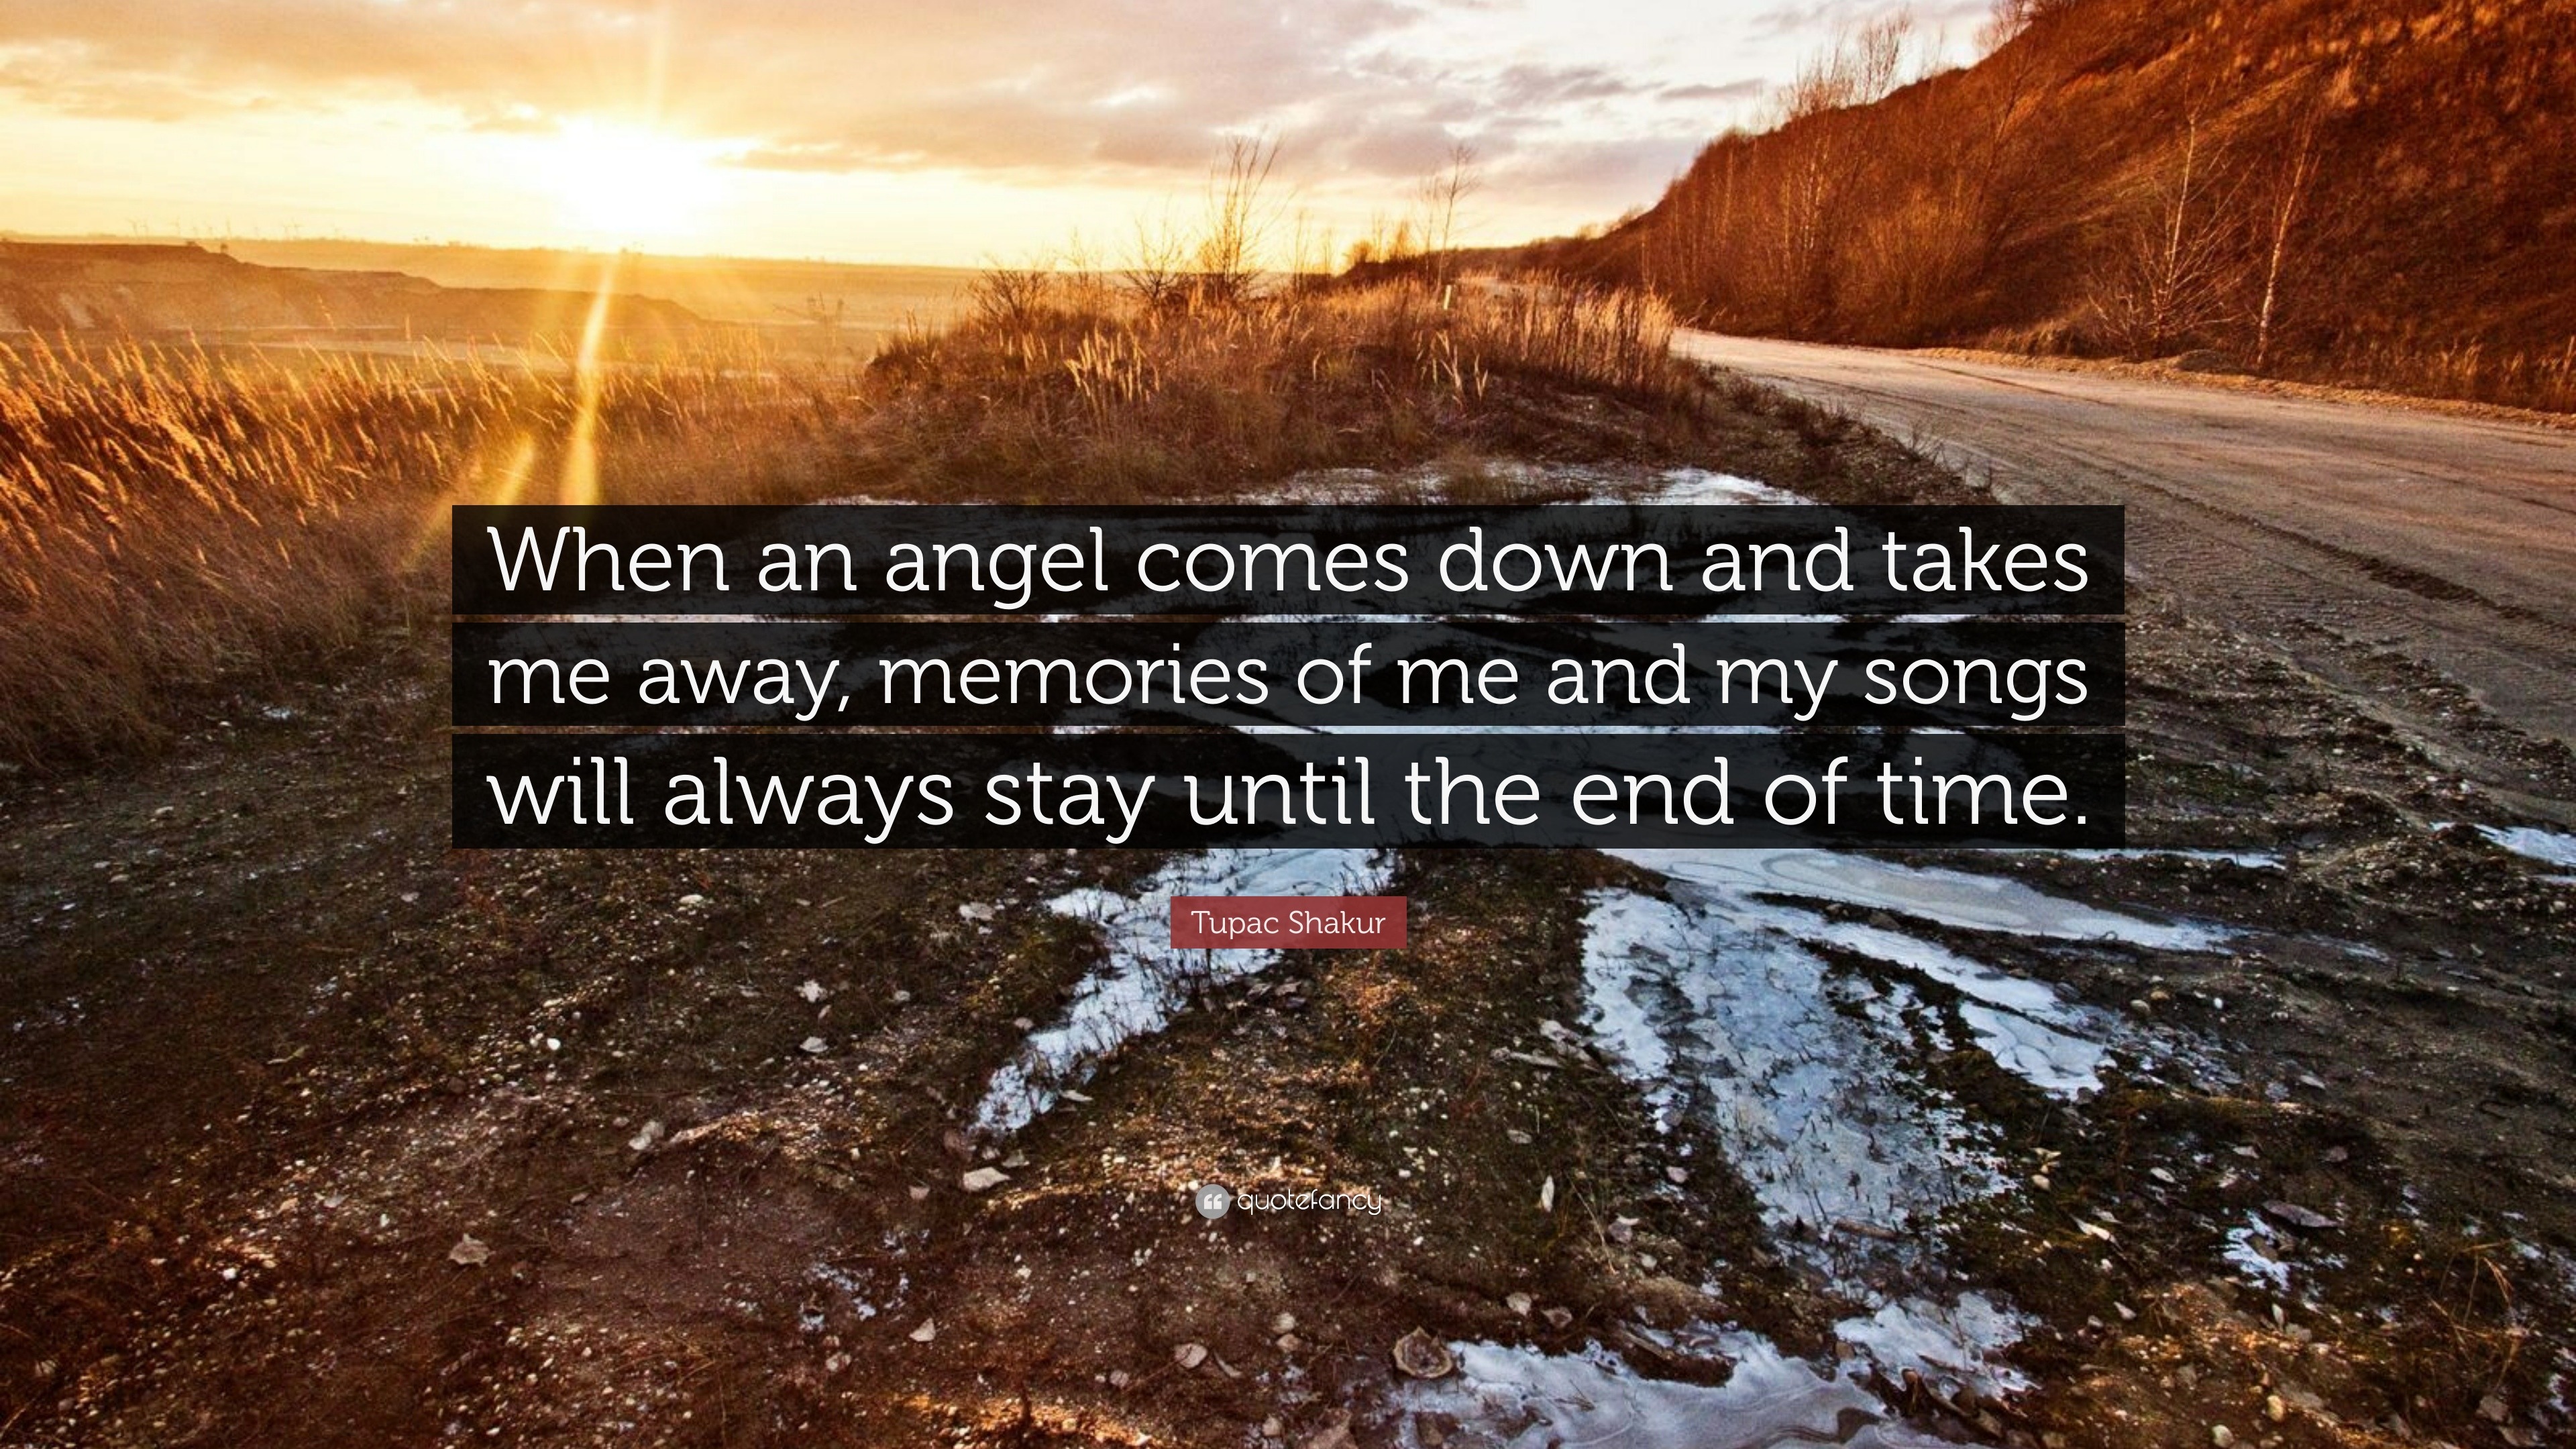 228 Angel Quotes & Sayings to Bring Out the Good